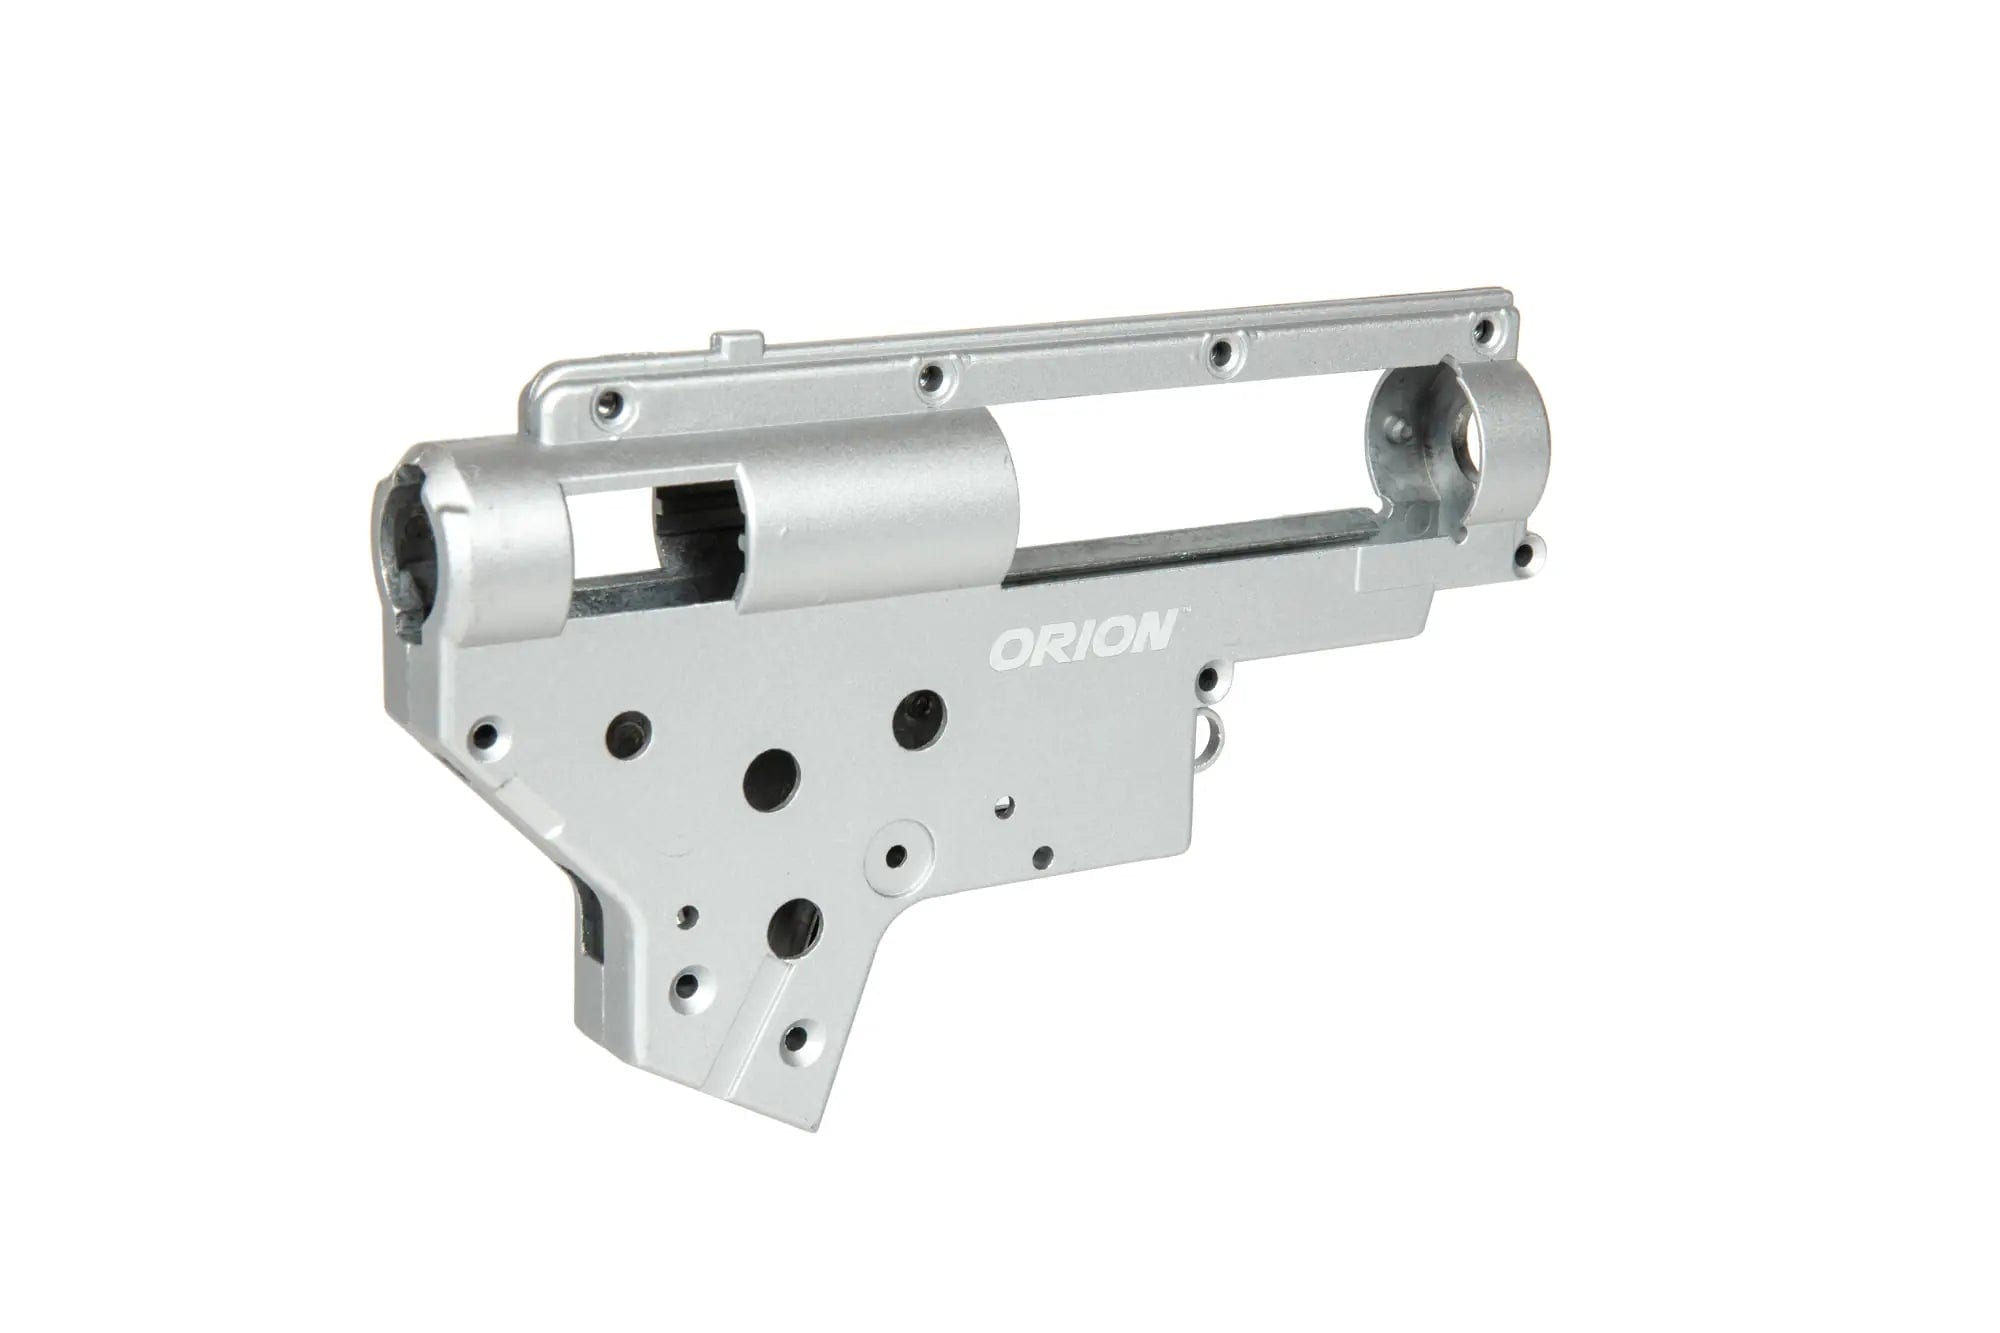 ORION V2 Gearbox Shell für M4 Specna Arms EDGE (ohne Lager)